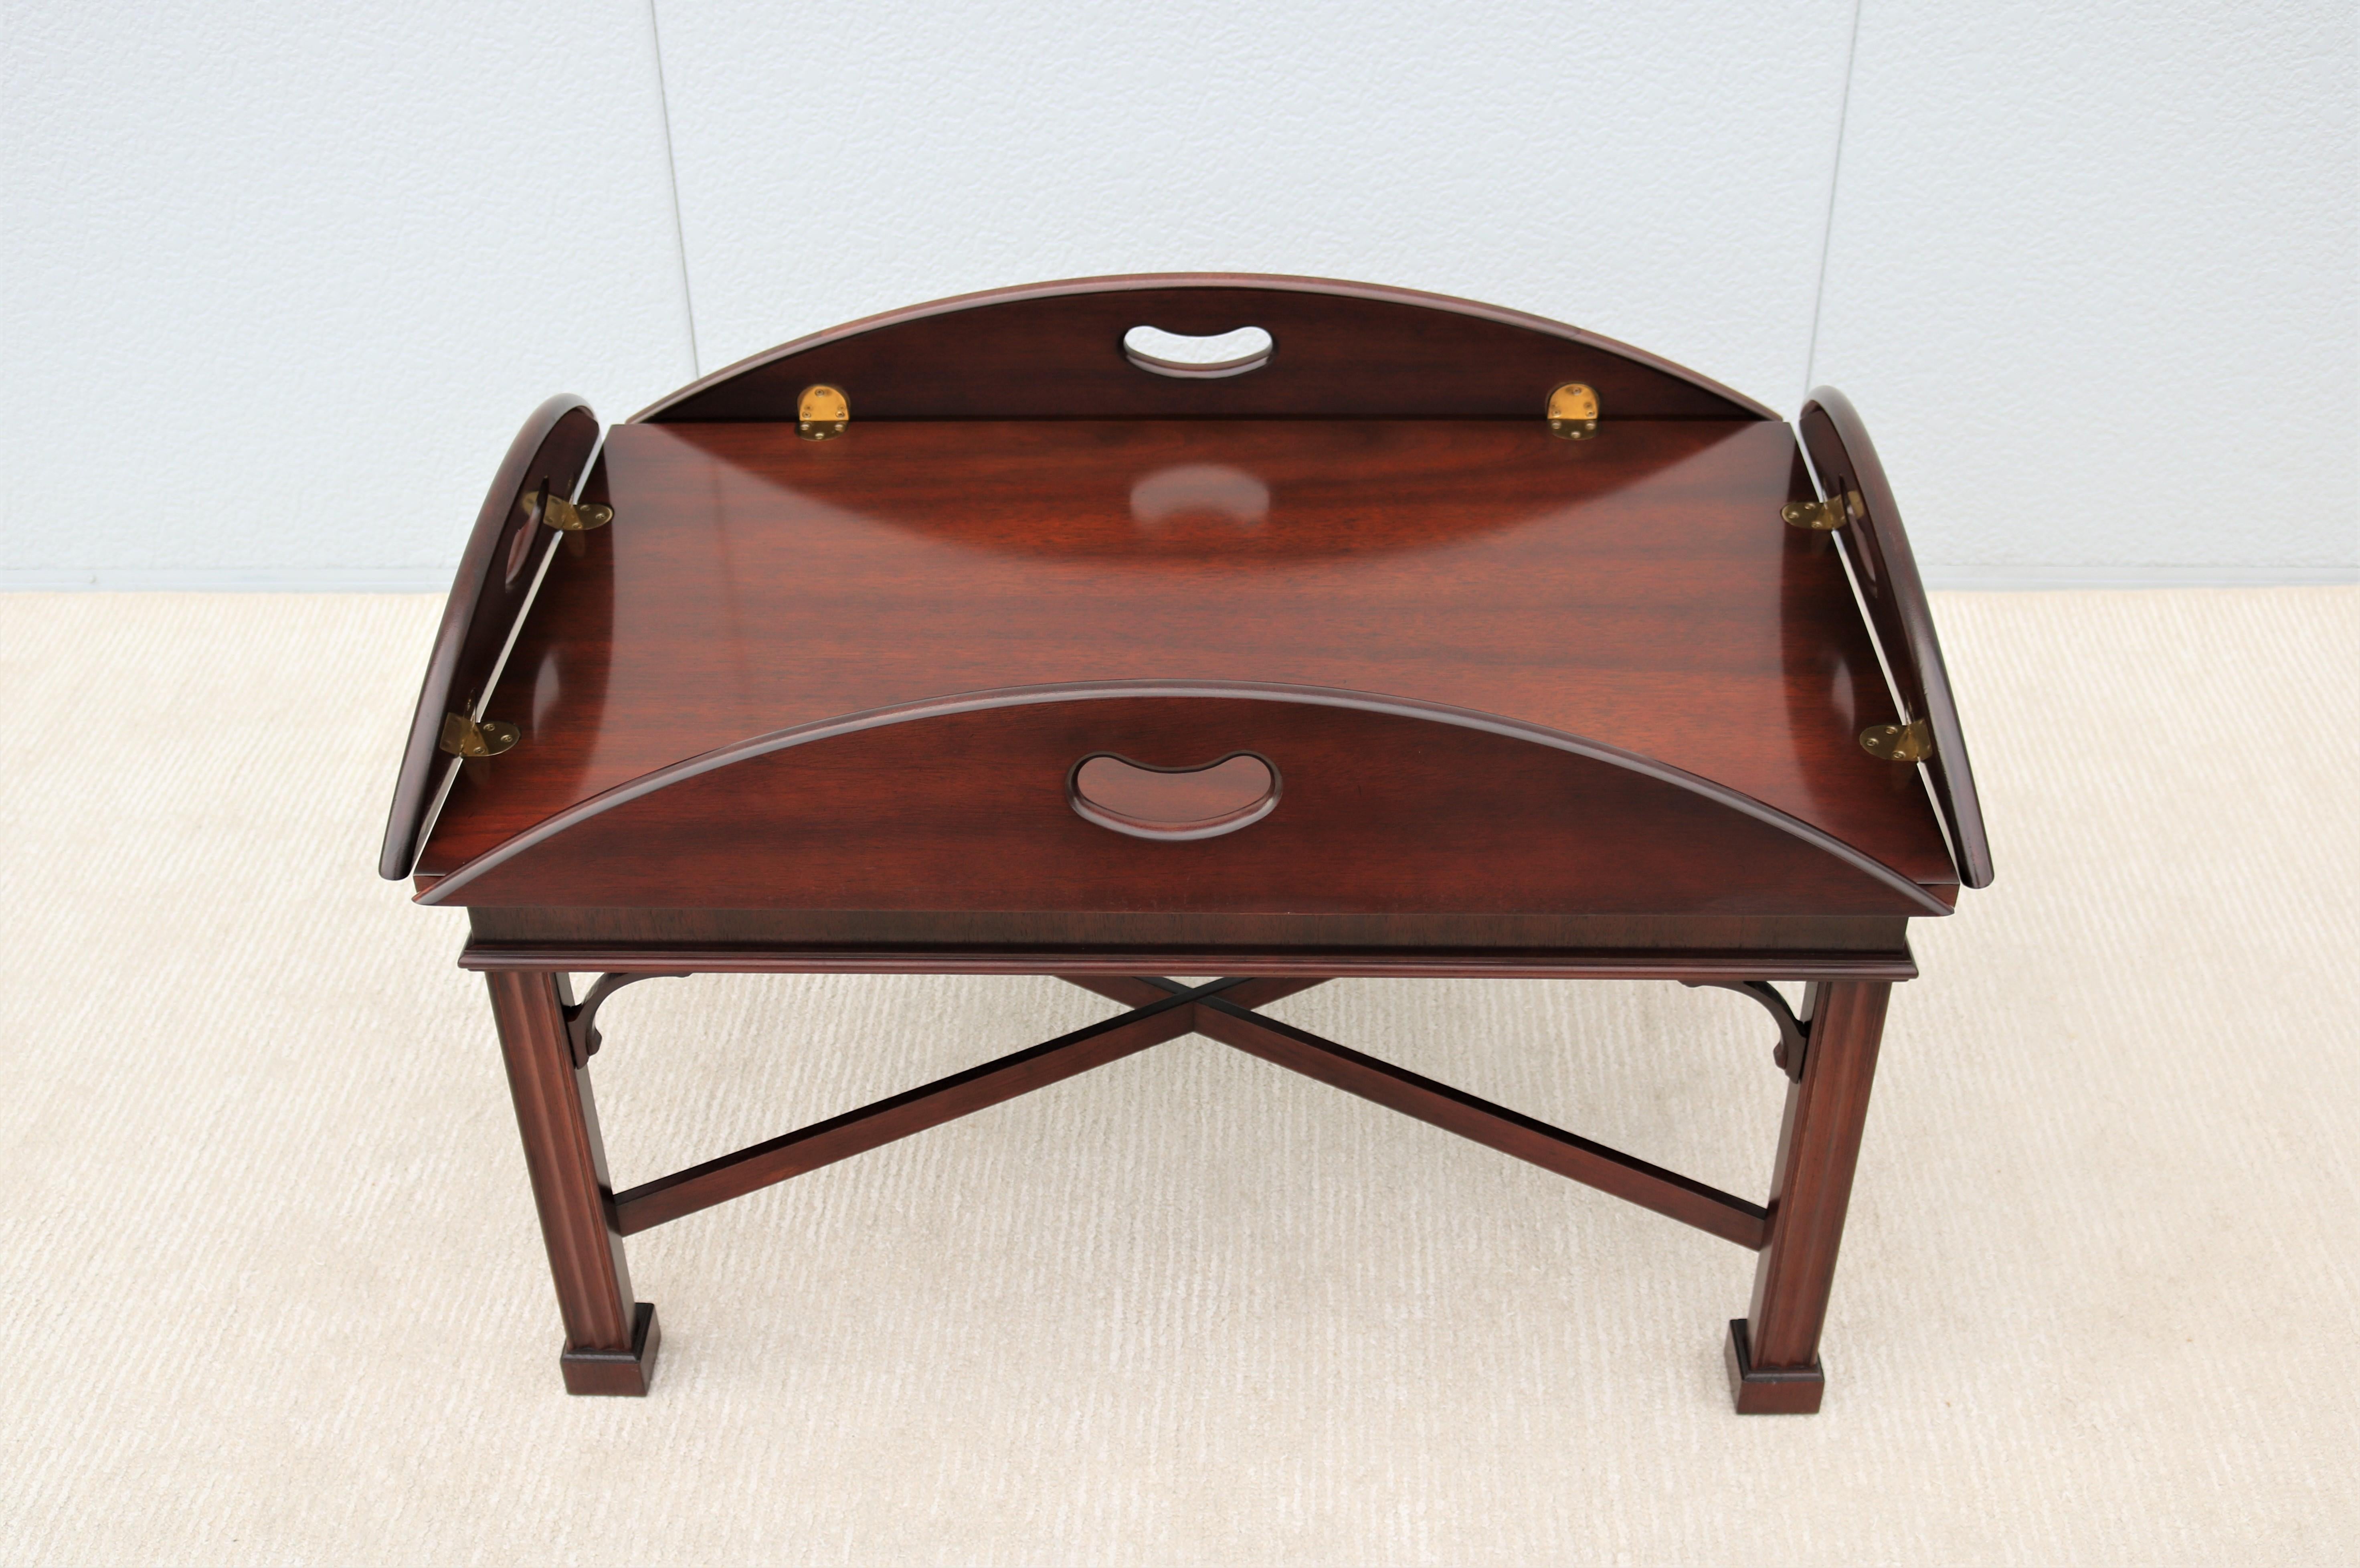 Fabulous traditional Kimball mahogany drop-leaf butler tray coffee table.
Generation after generation chooses this style of table for elegance and function.
Feature four hinged lift-up pierced handholds leaves with bright solid brass